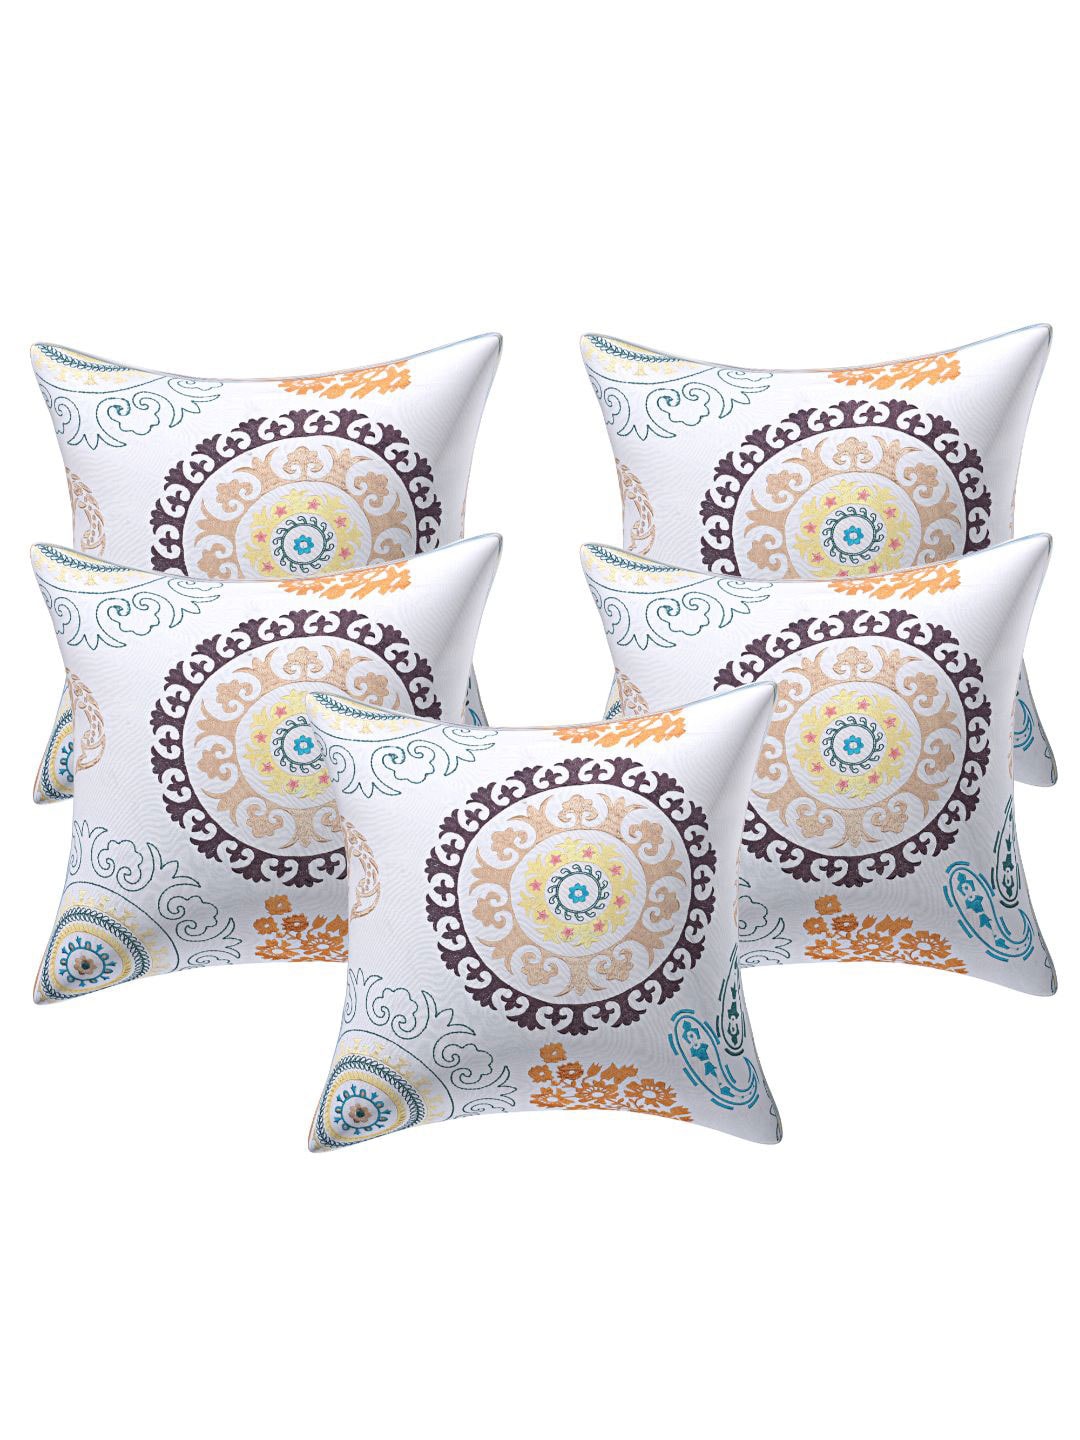 INDHOME LIFE White & Beige Set of 5 Abstract Square Cushion Covers Price in India